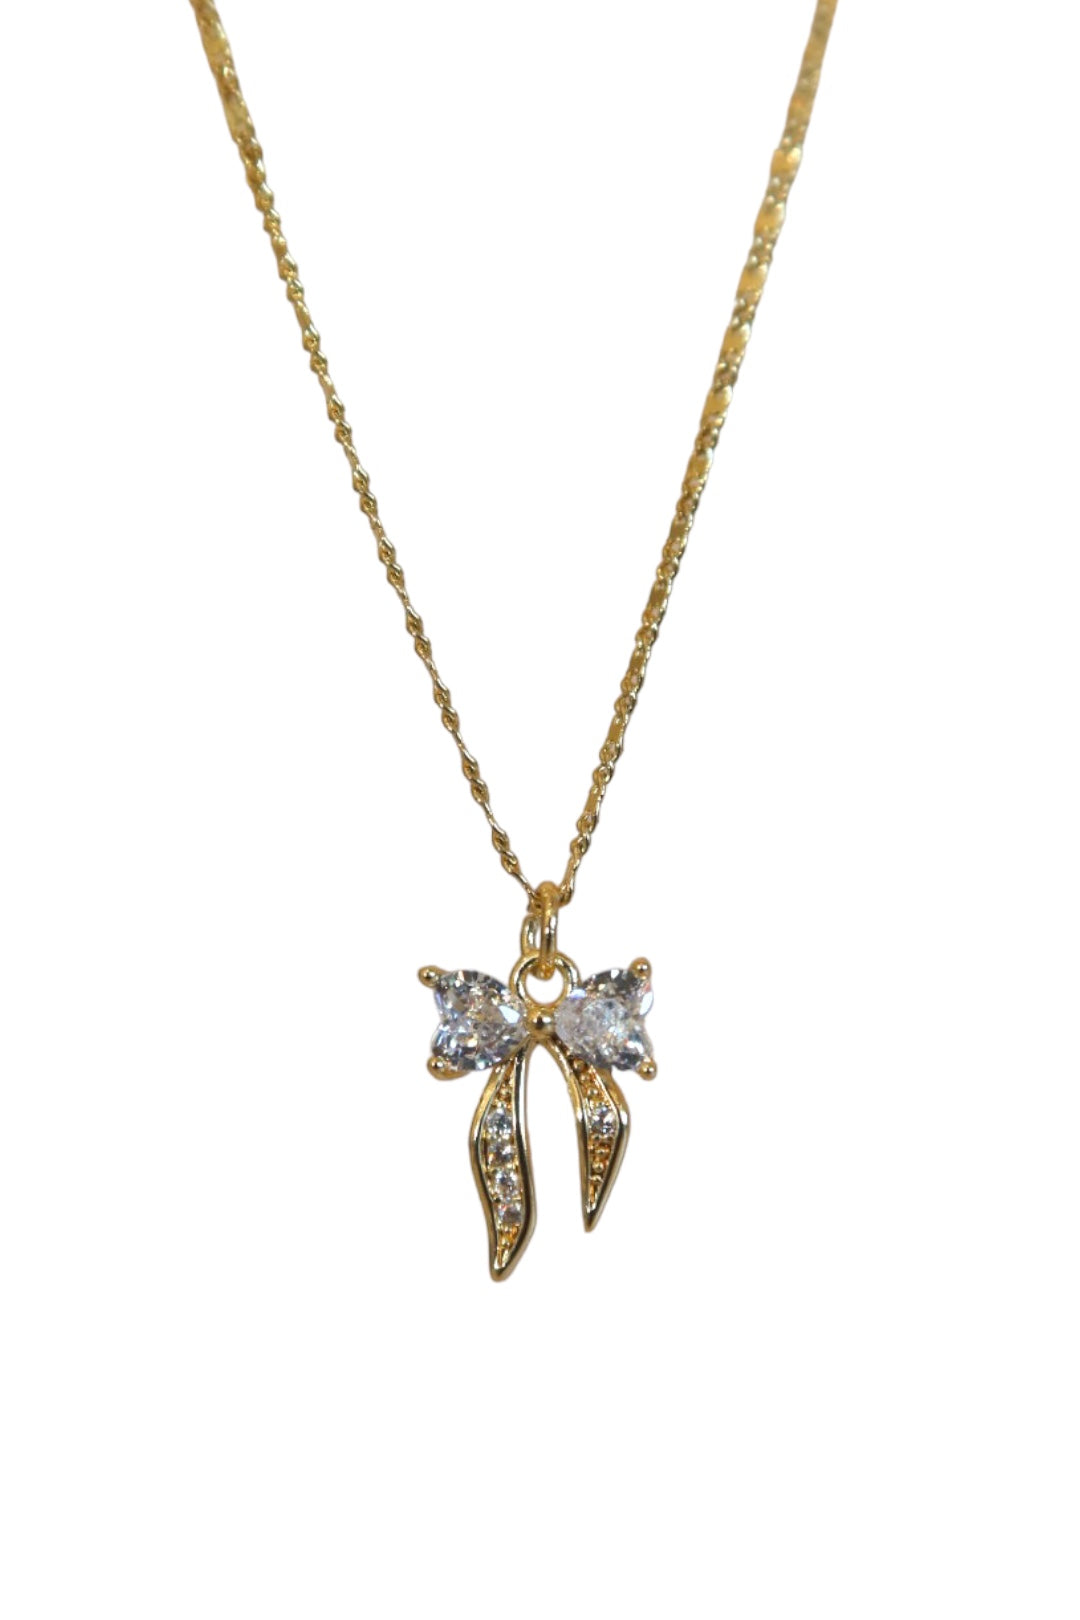 “Lolita” 14k gold filled bow necklace